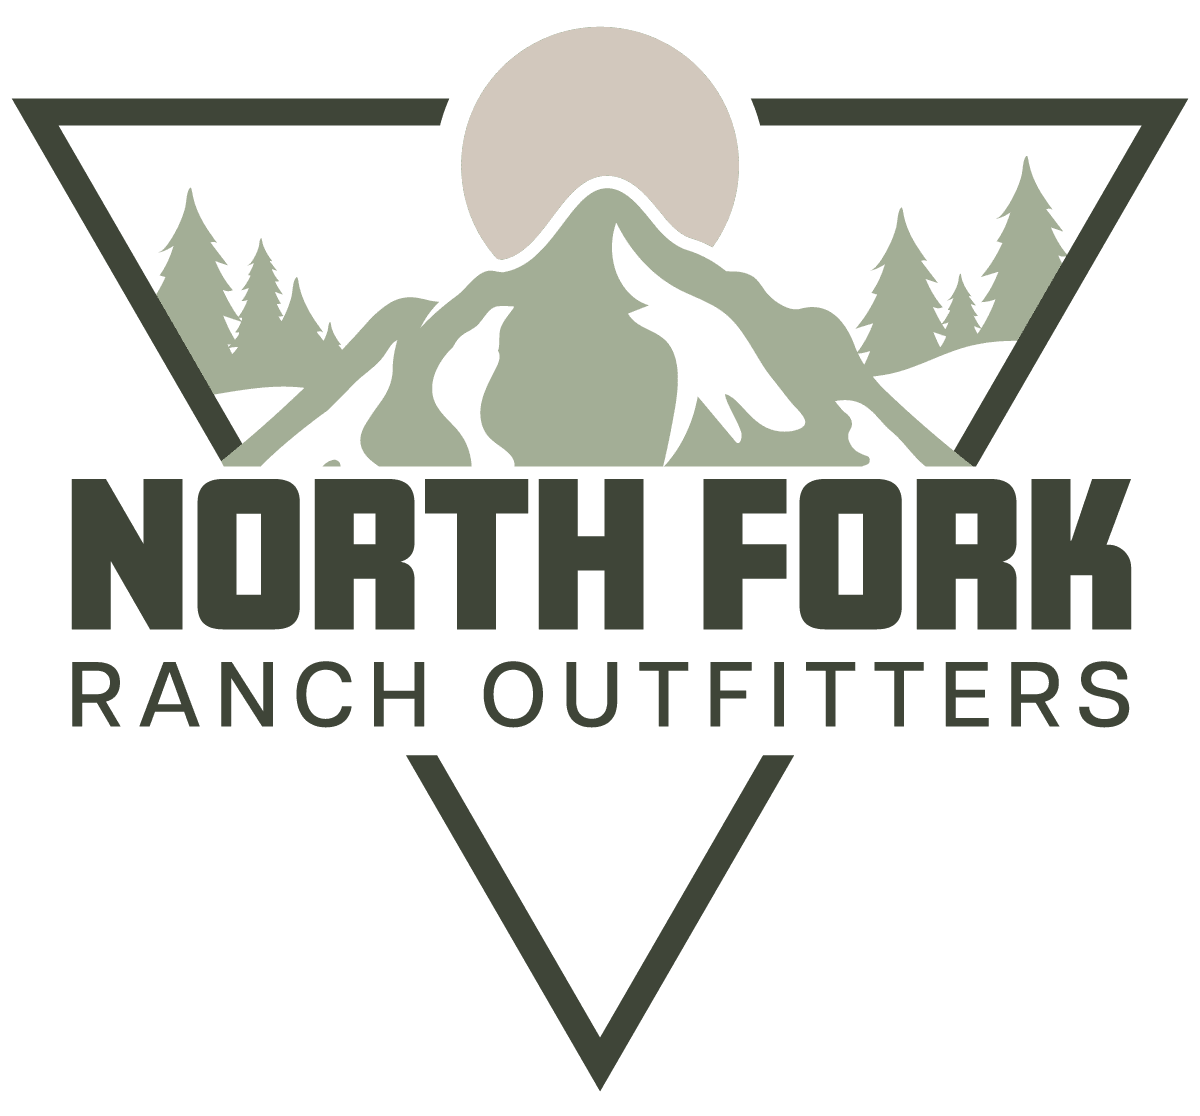 669a6a02a6ecb_CX-114757_North-Fork-Ranch-Outfitters_Final